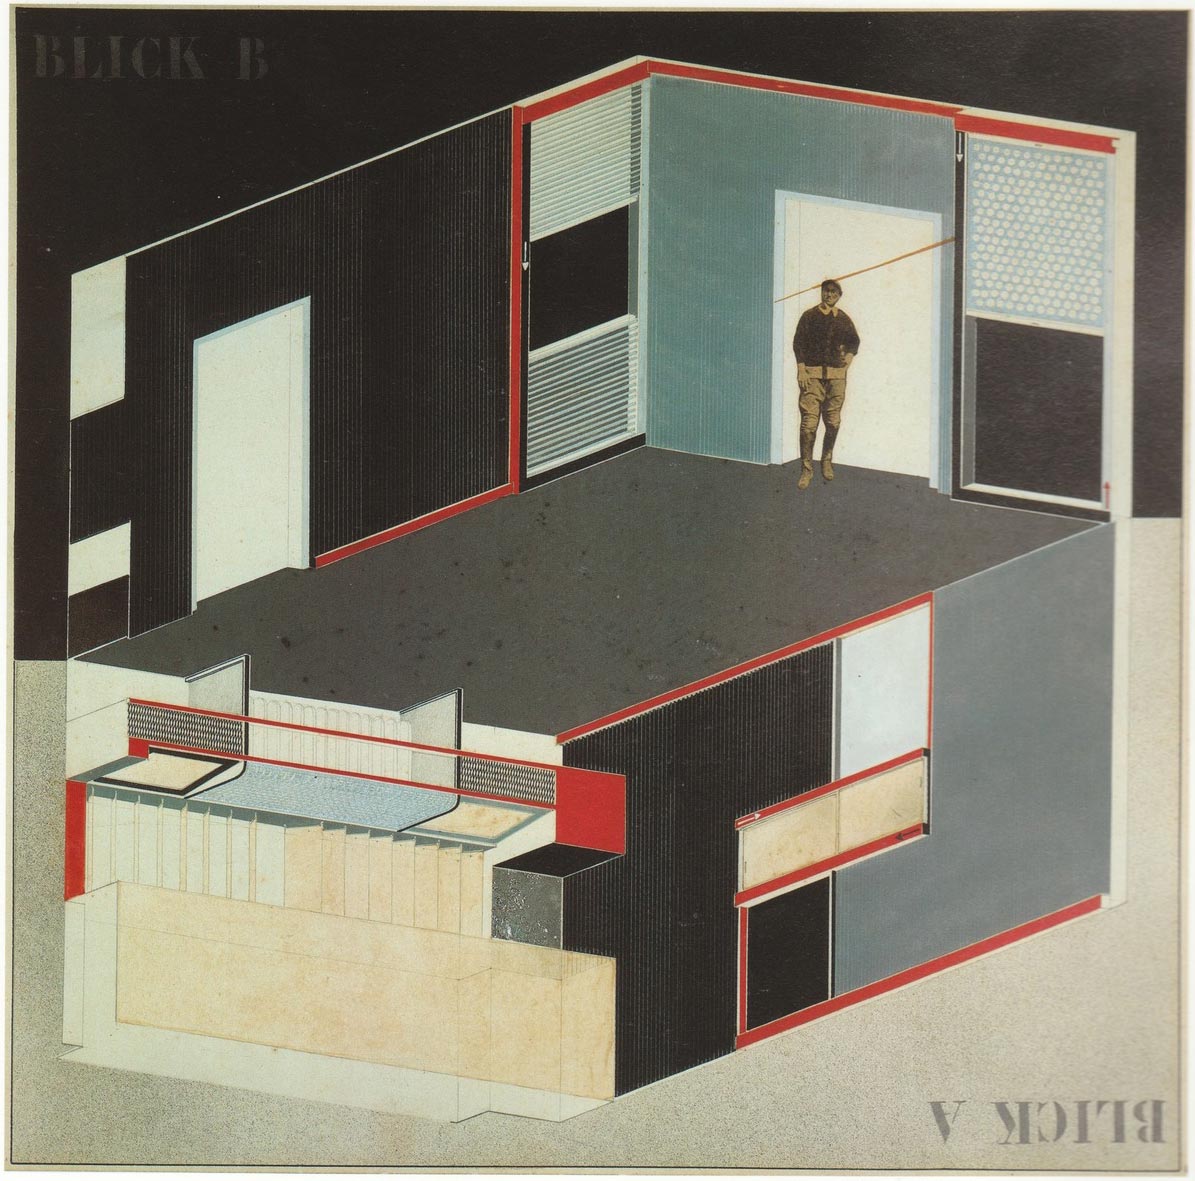 El Lissitzky, Cabinet-of abstraction, Commisioned by Alexander Dorner for Hannover Provincial Museum, 1927